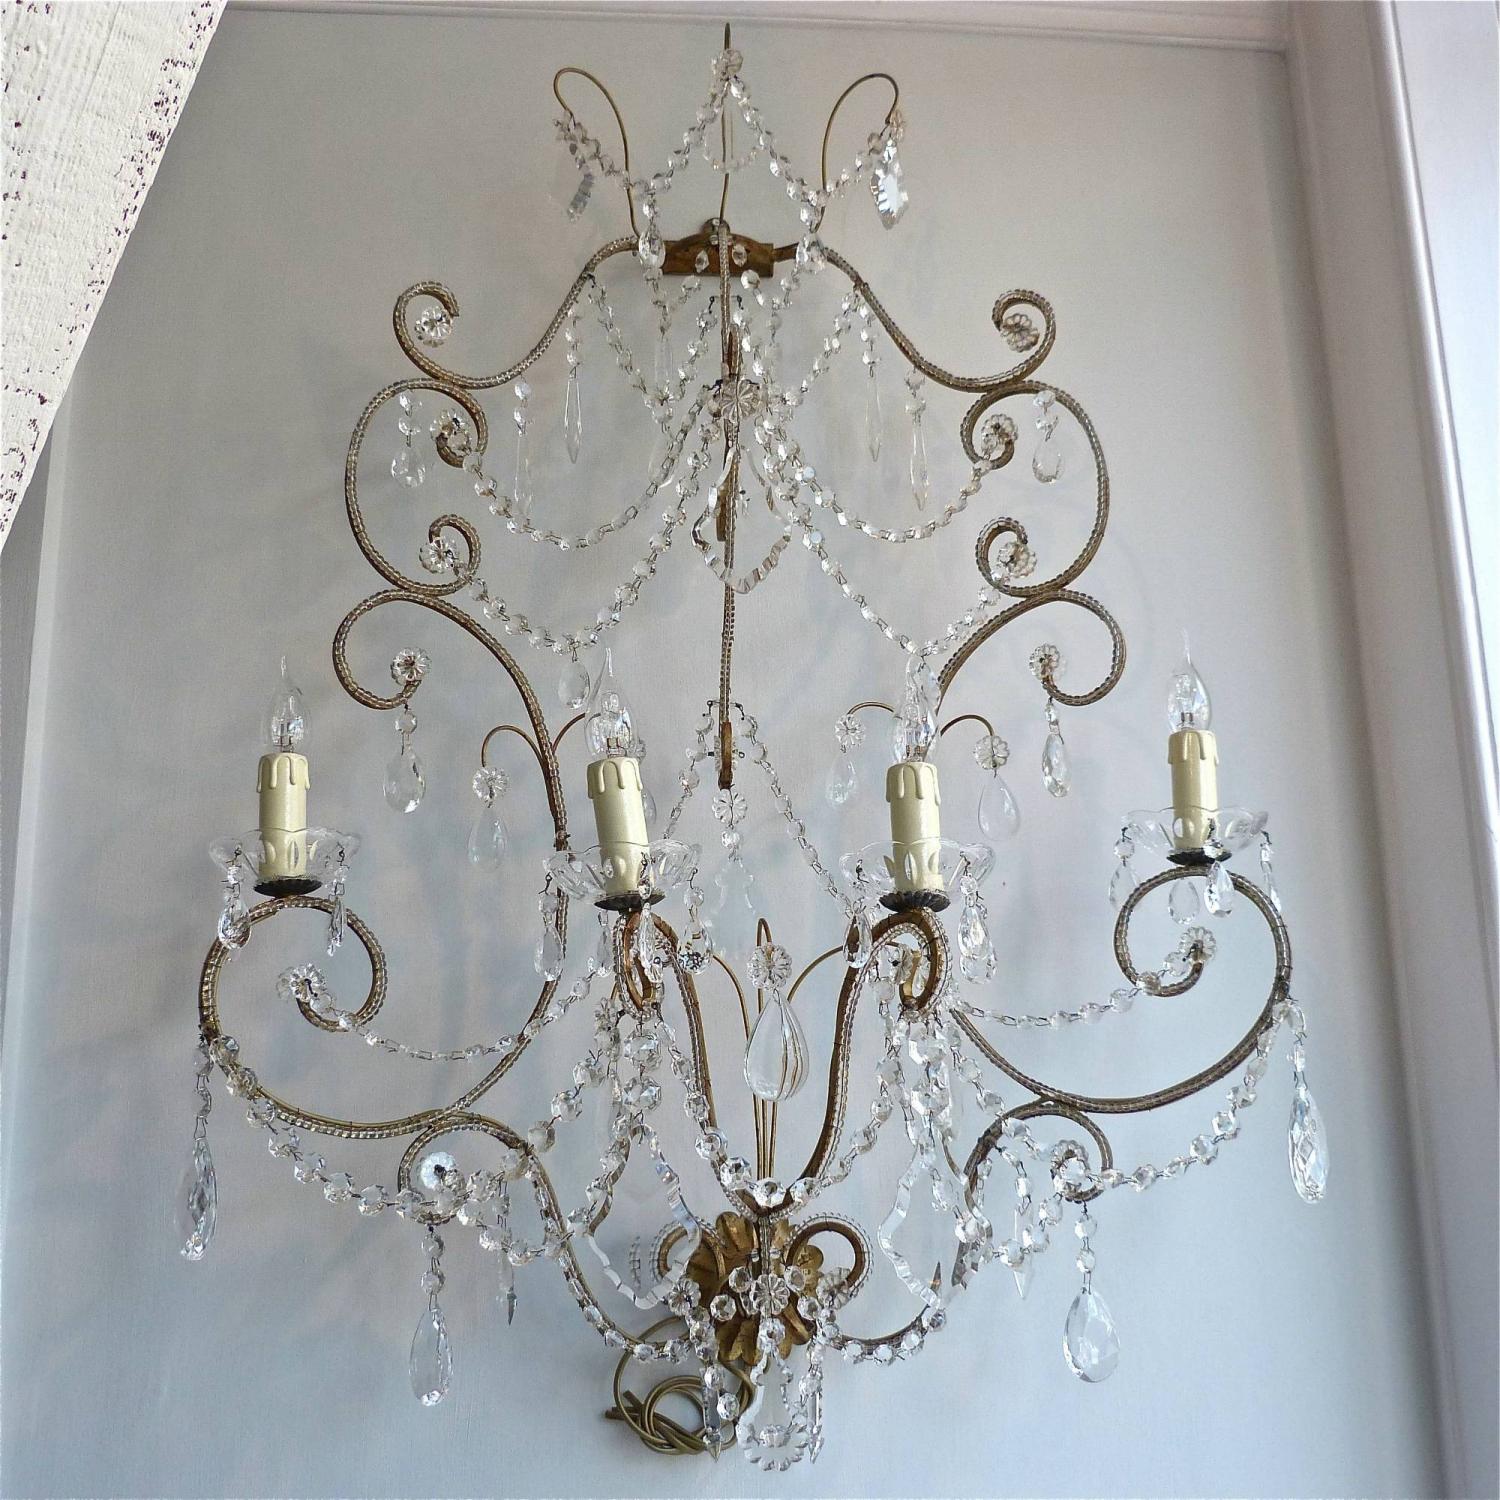 INCREDIBLE PAIR OF BEADED & DROPLET WALL SCONCES